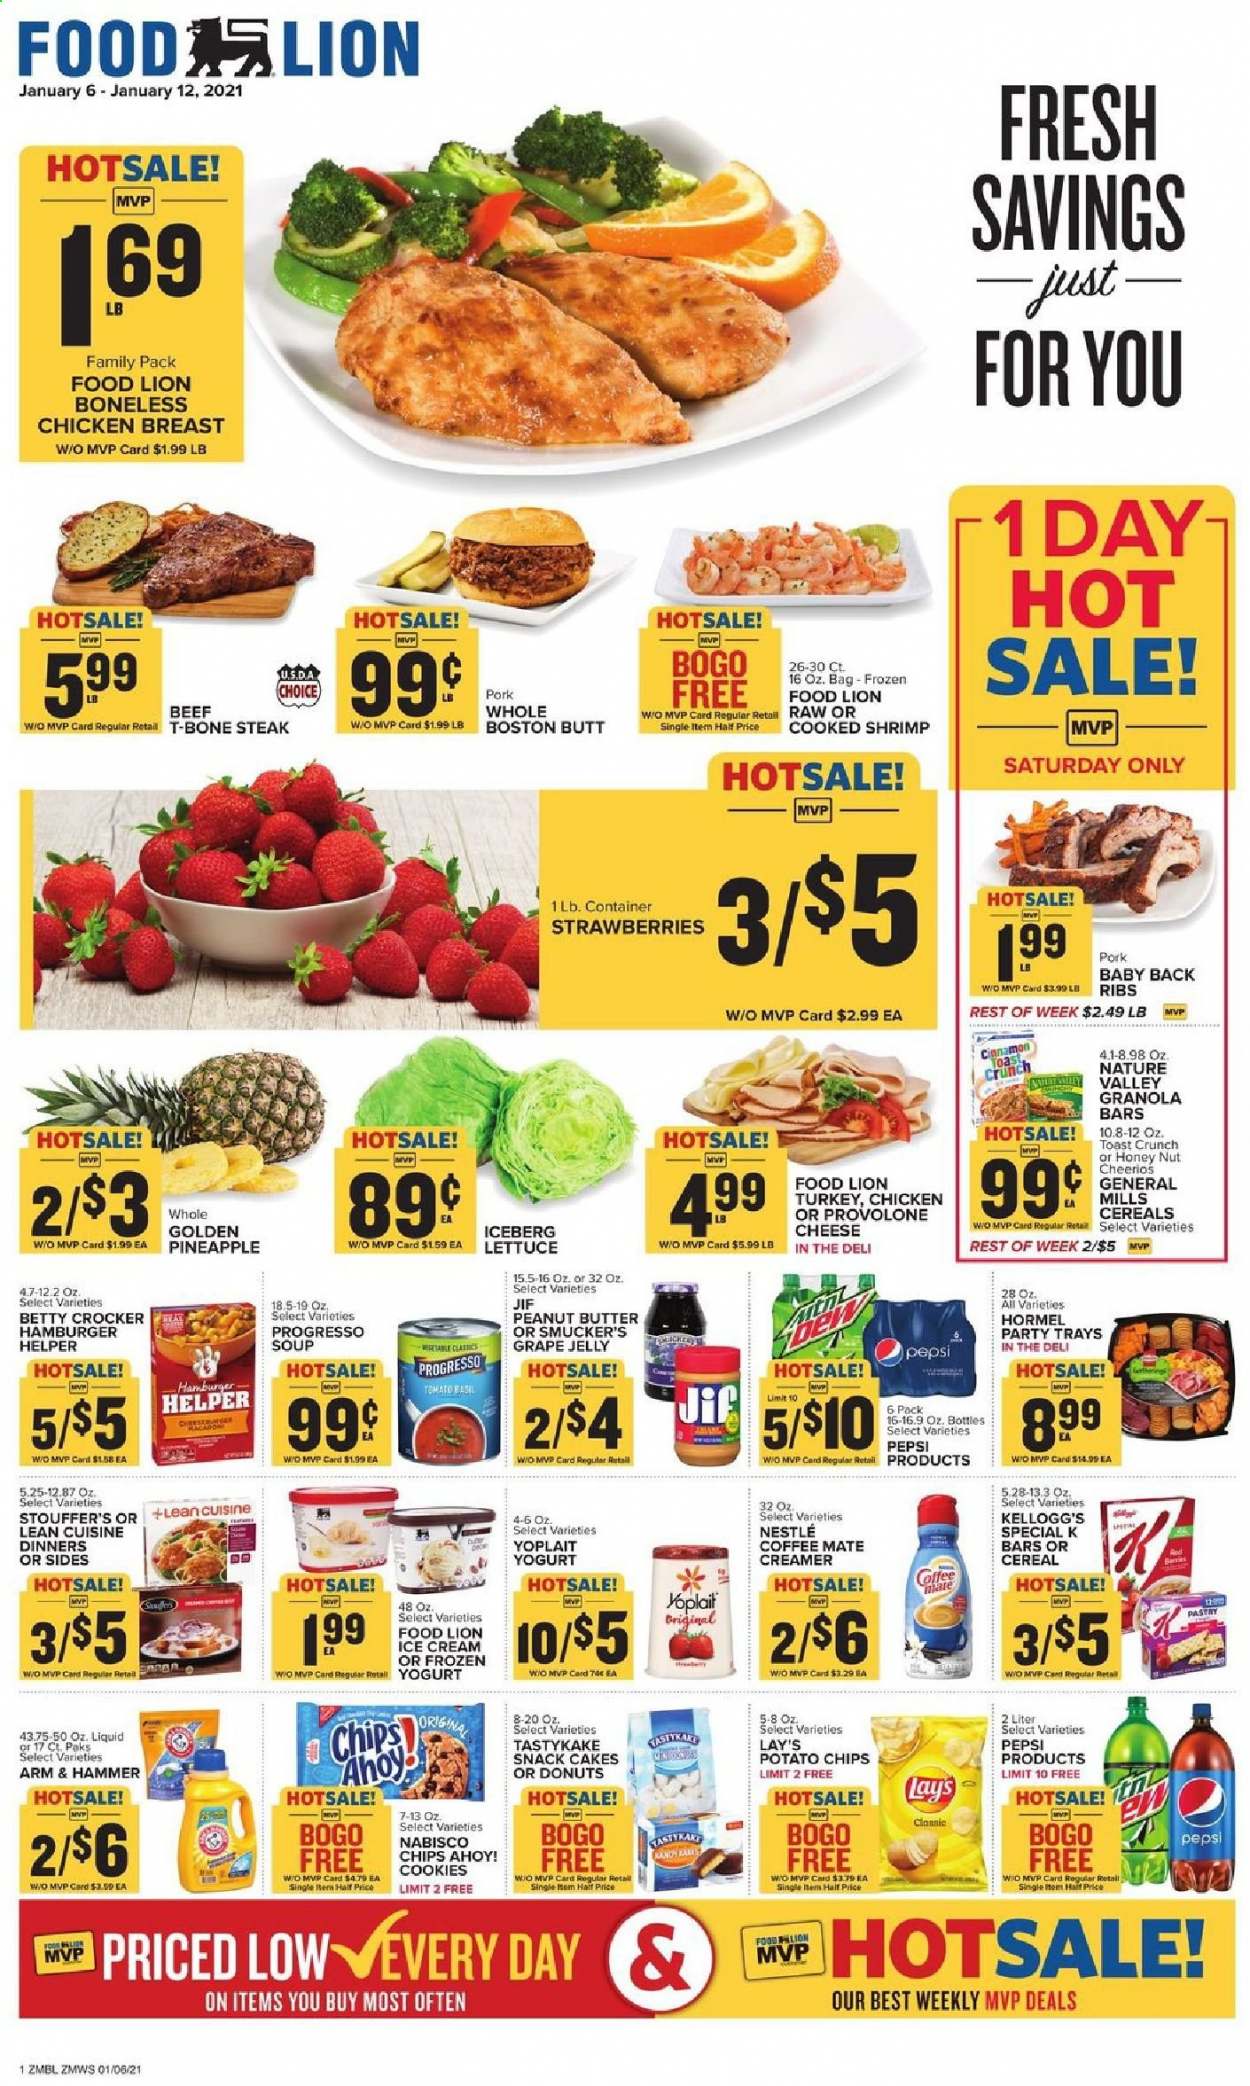 thumbnail - Food Lion Flyer - 01/06/2021 - 01/12/2021 - Sales products - lettuce, toast bread, cake, donut, shrimps, Progresso, Lean Cuisine, Hormel, cheese, Provolone, yoghurt, jelly, Yoplait, Coffee-Mate, creamer, ice cream, strawberries, Stouffer's, Nestlé, Kellogg's, Chips Ahoy!, potato chips, snack, Lay’s, ARM & HAMMER, Cheerios, granola bar, Nature Valley, grape jelly, peanut butter, Jif, Pepsi, chicken breasts, beef meat, t-bone steak, steak, pork meat, pork back ribs. Page 1.